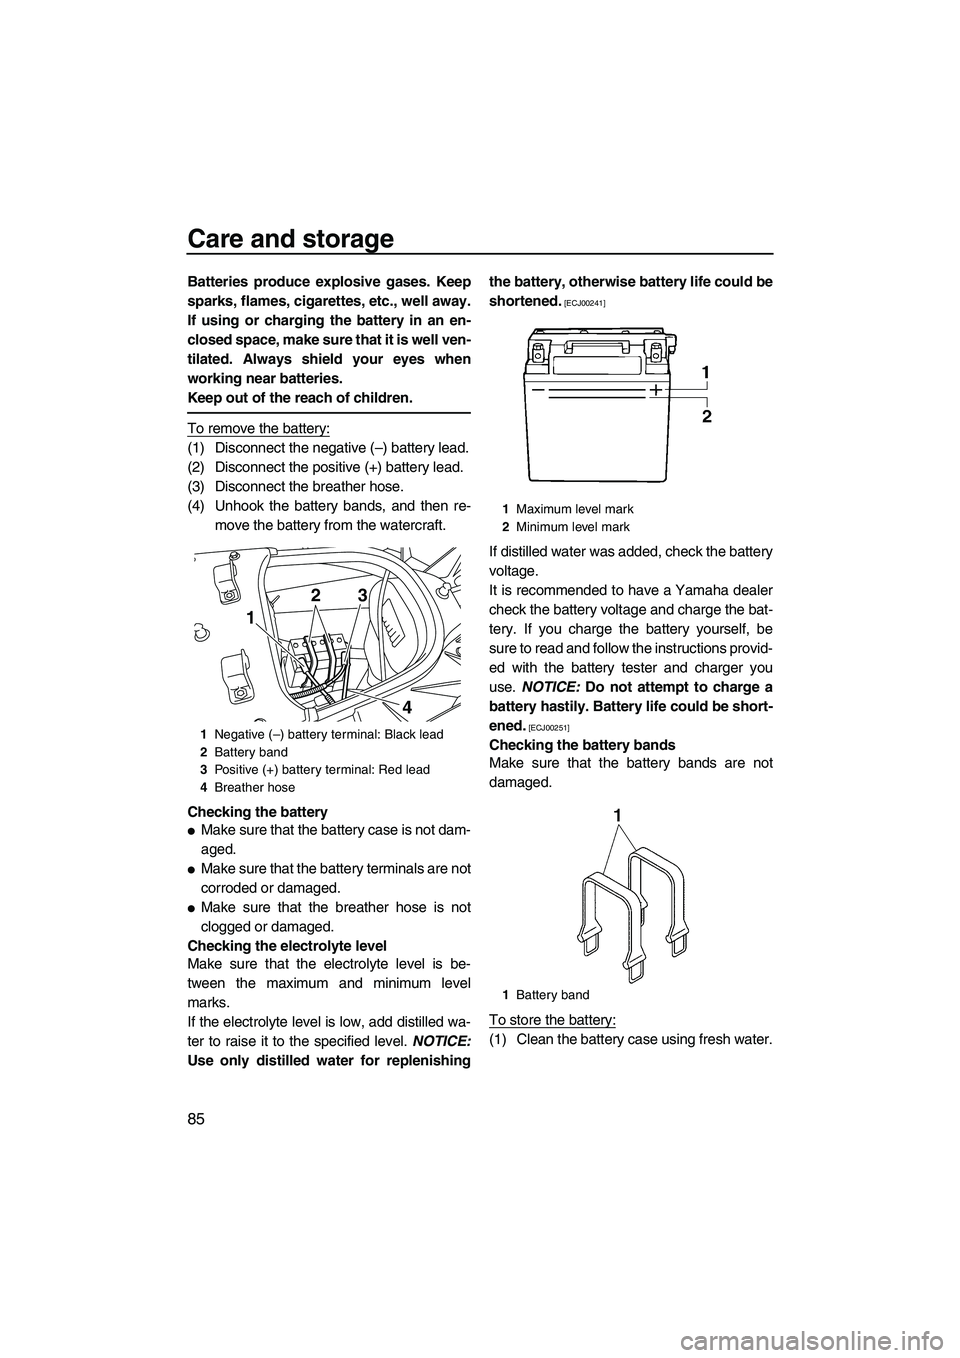 YAMAHA FX SHO 2010  Owners Manual Care and storage
85
Batteries produce explosive gases. Keep
sparks, flames, cigarettes, etc., well away.
If using or charging the battery in an en-
closed space, make sure that it is well ven-
tilated